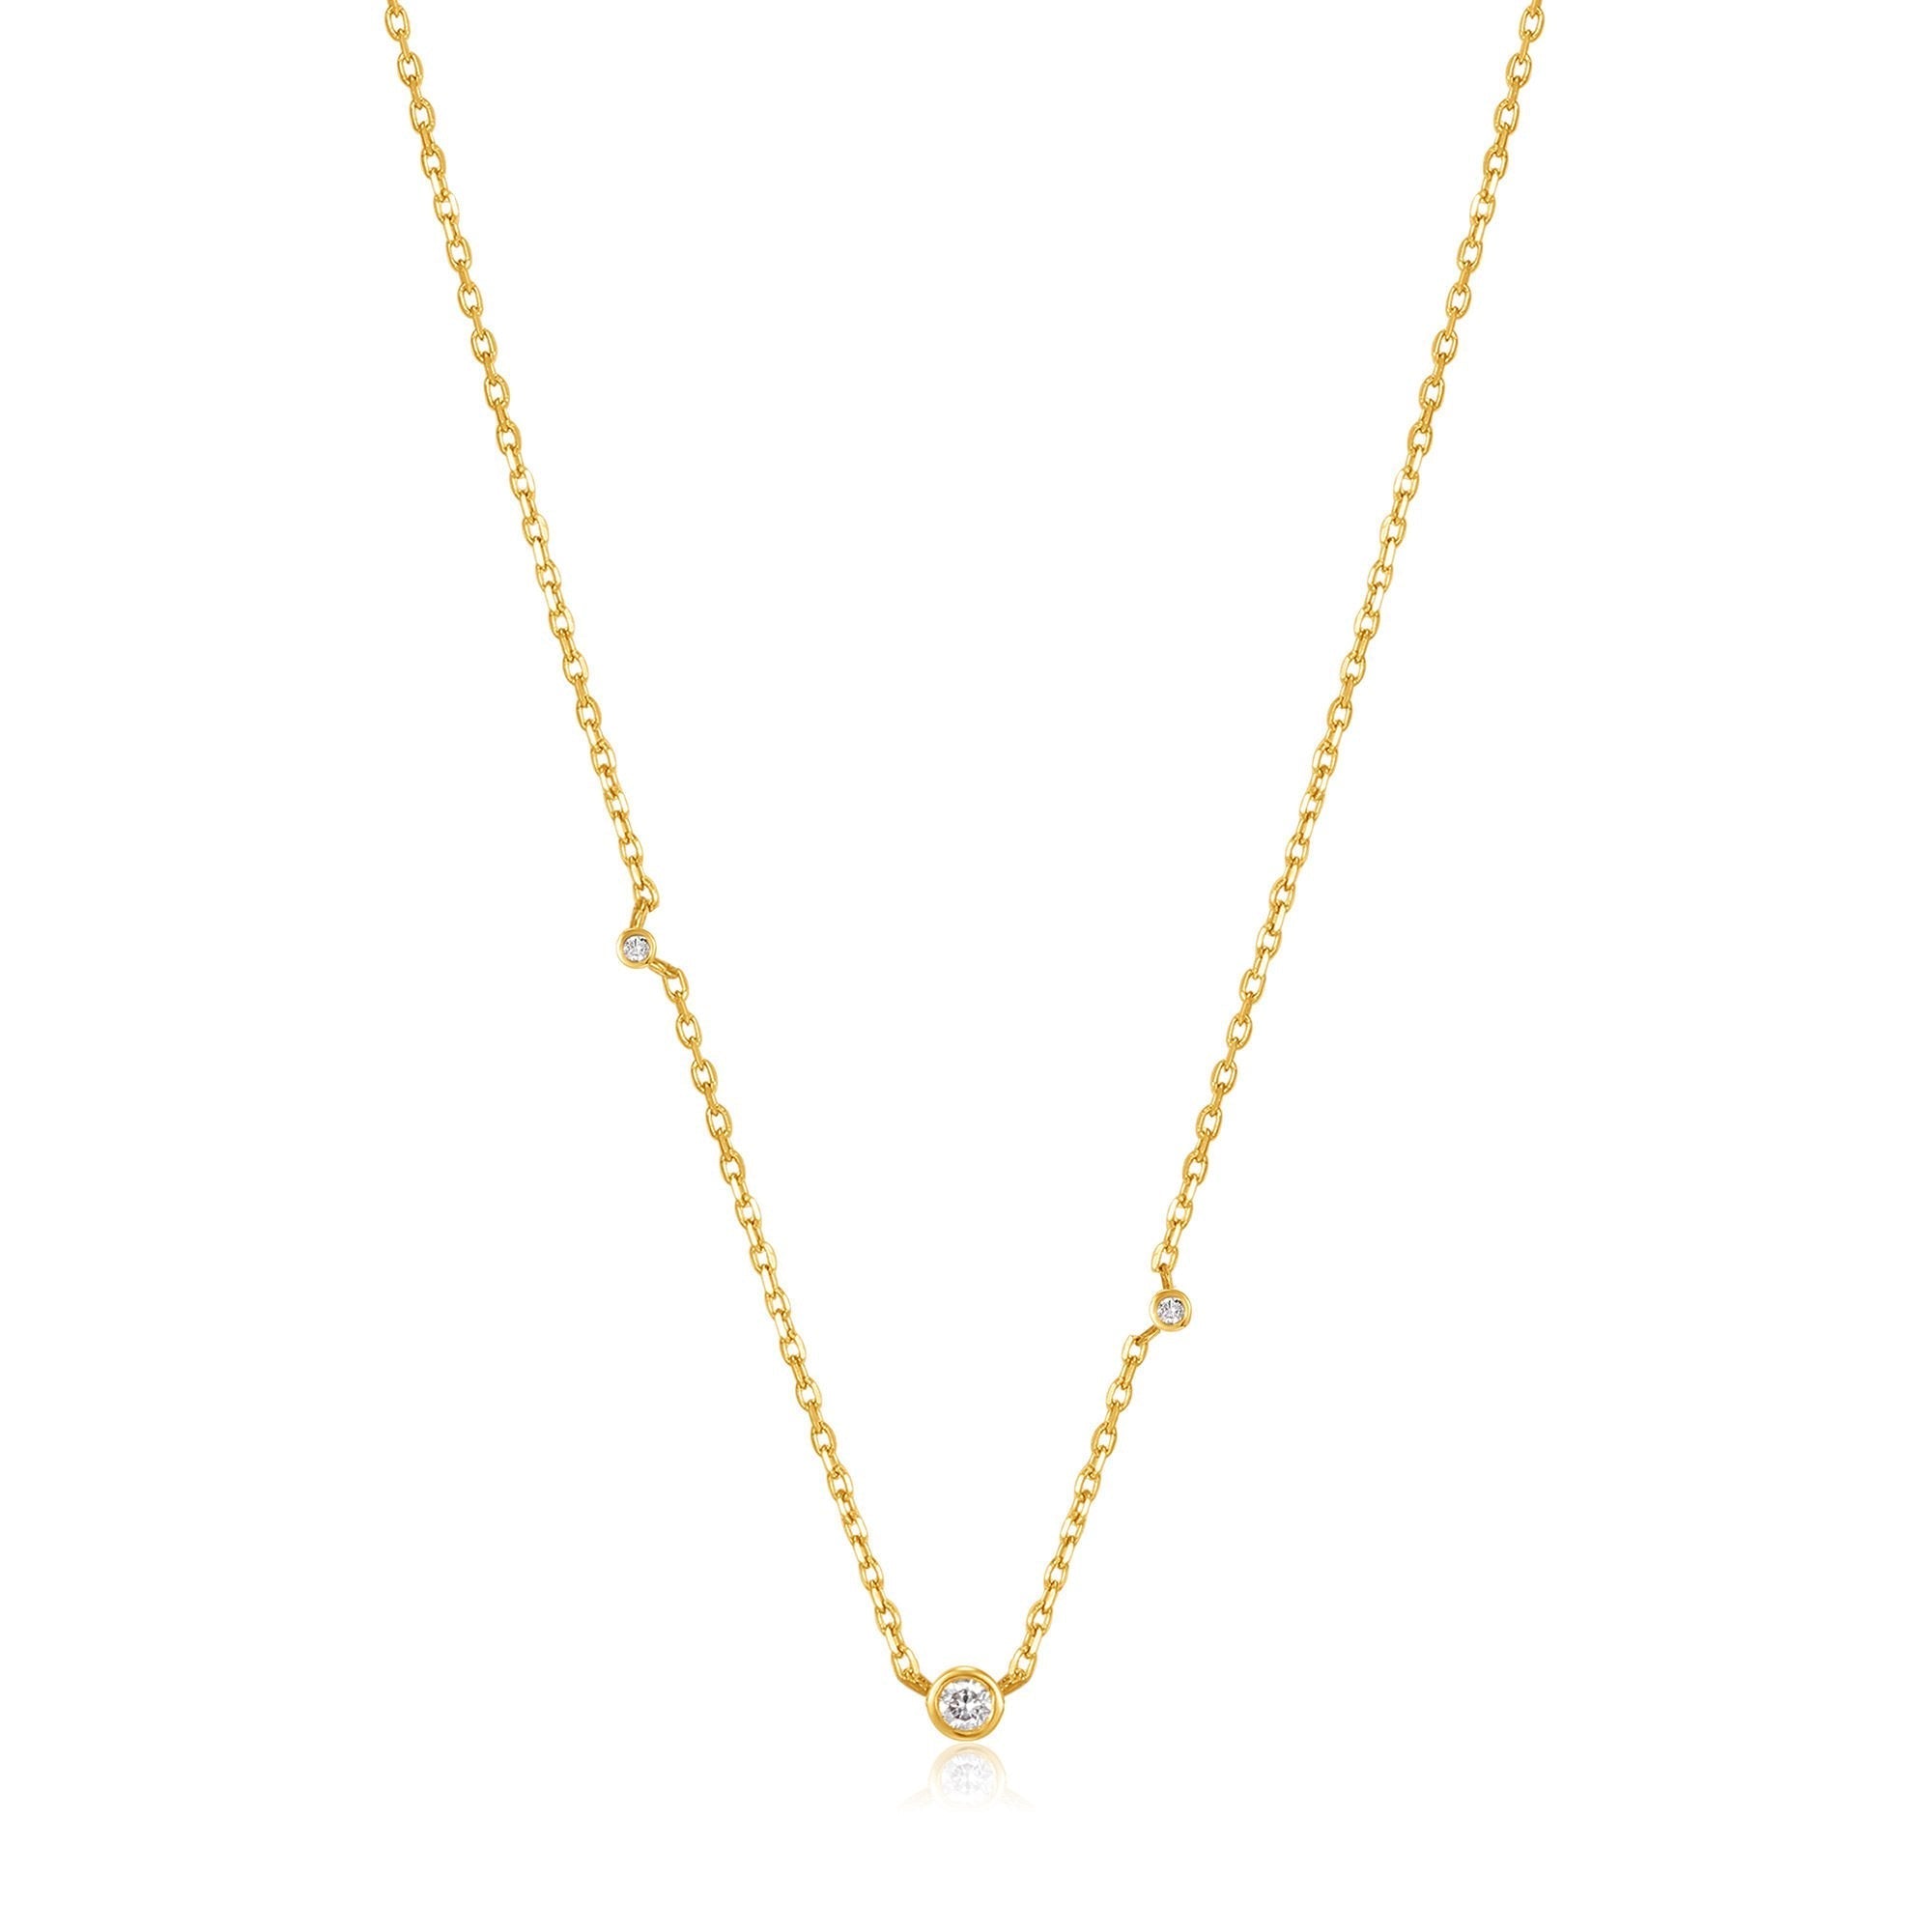 Ania Haie 14ct Gold Triple Natural Diamond Necklace